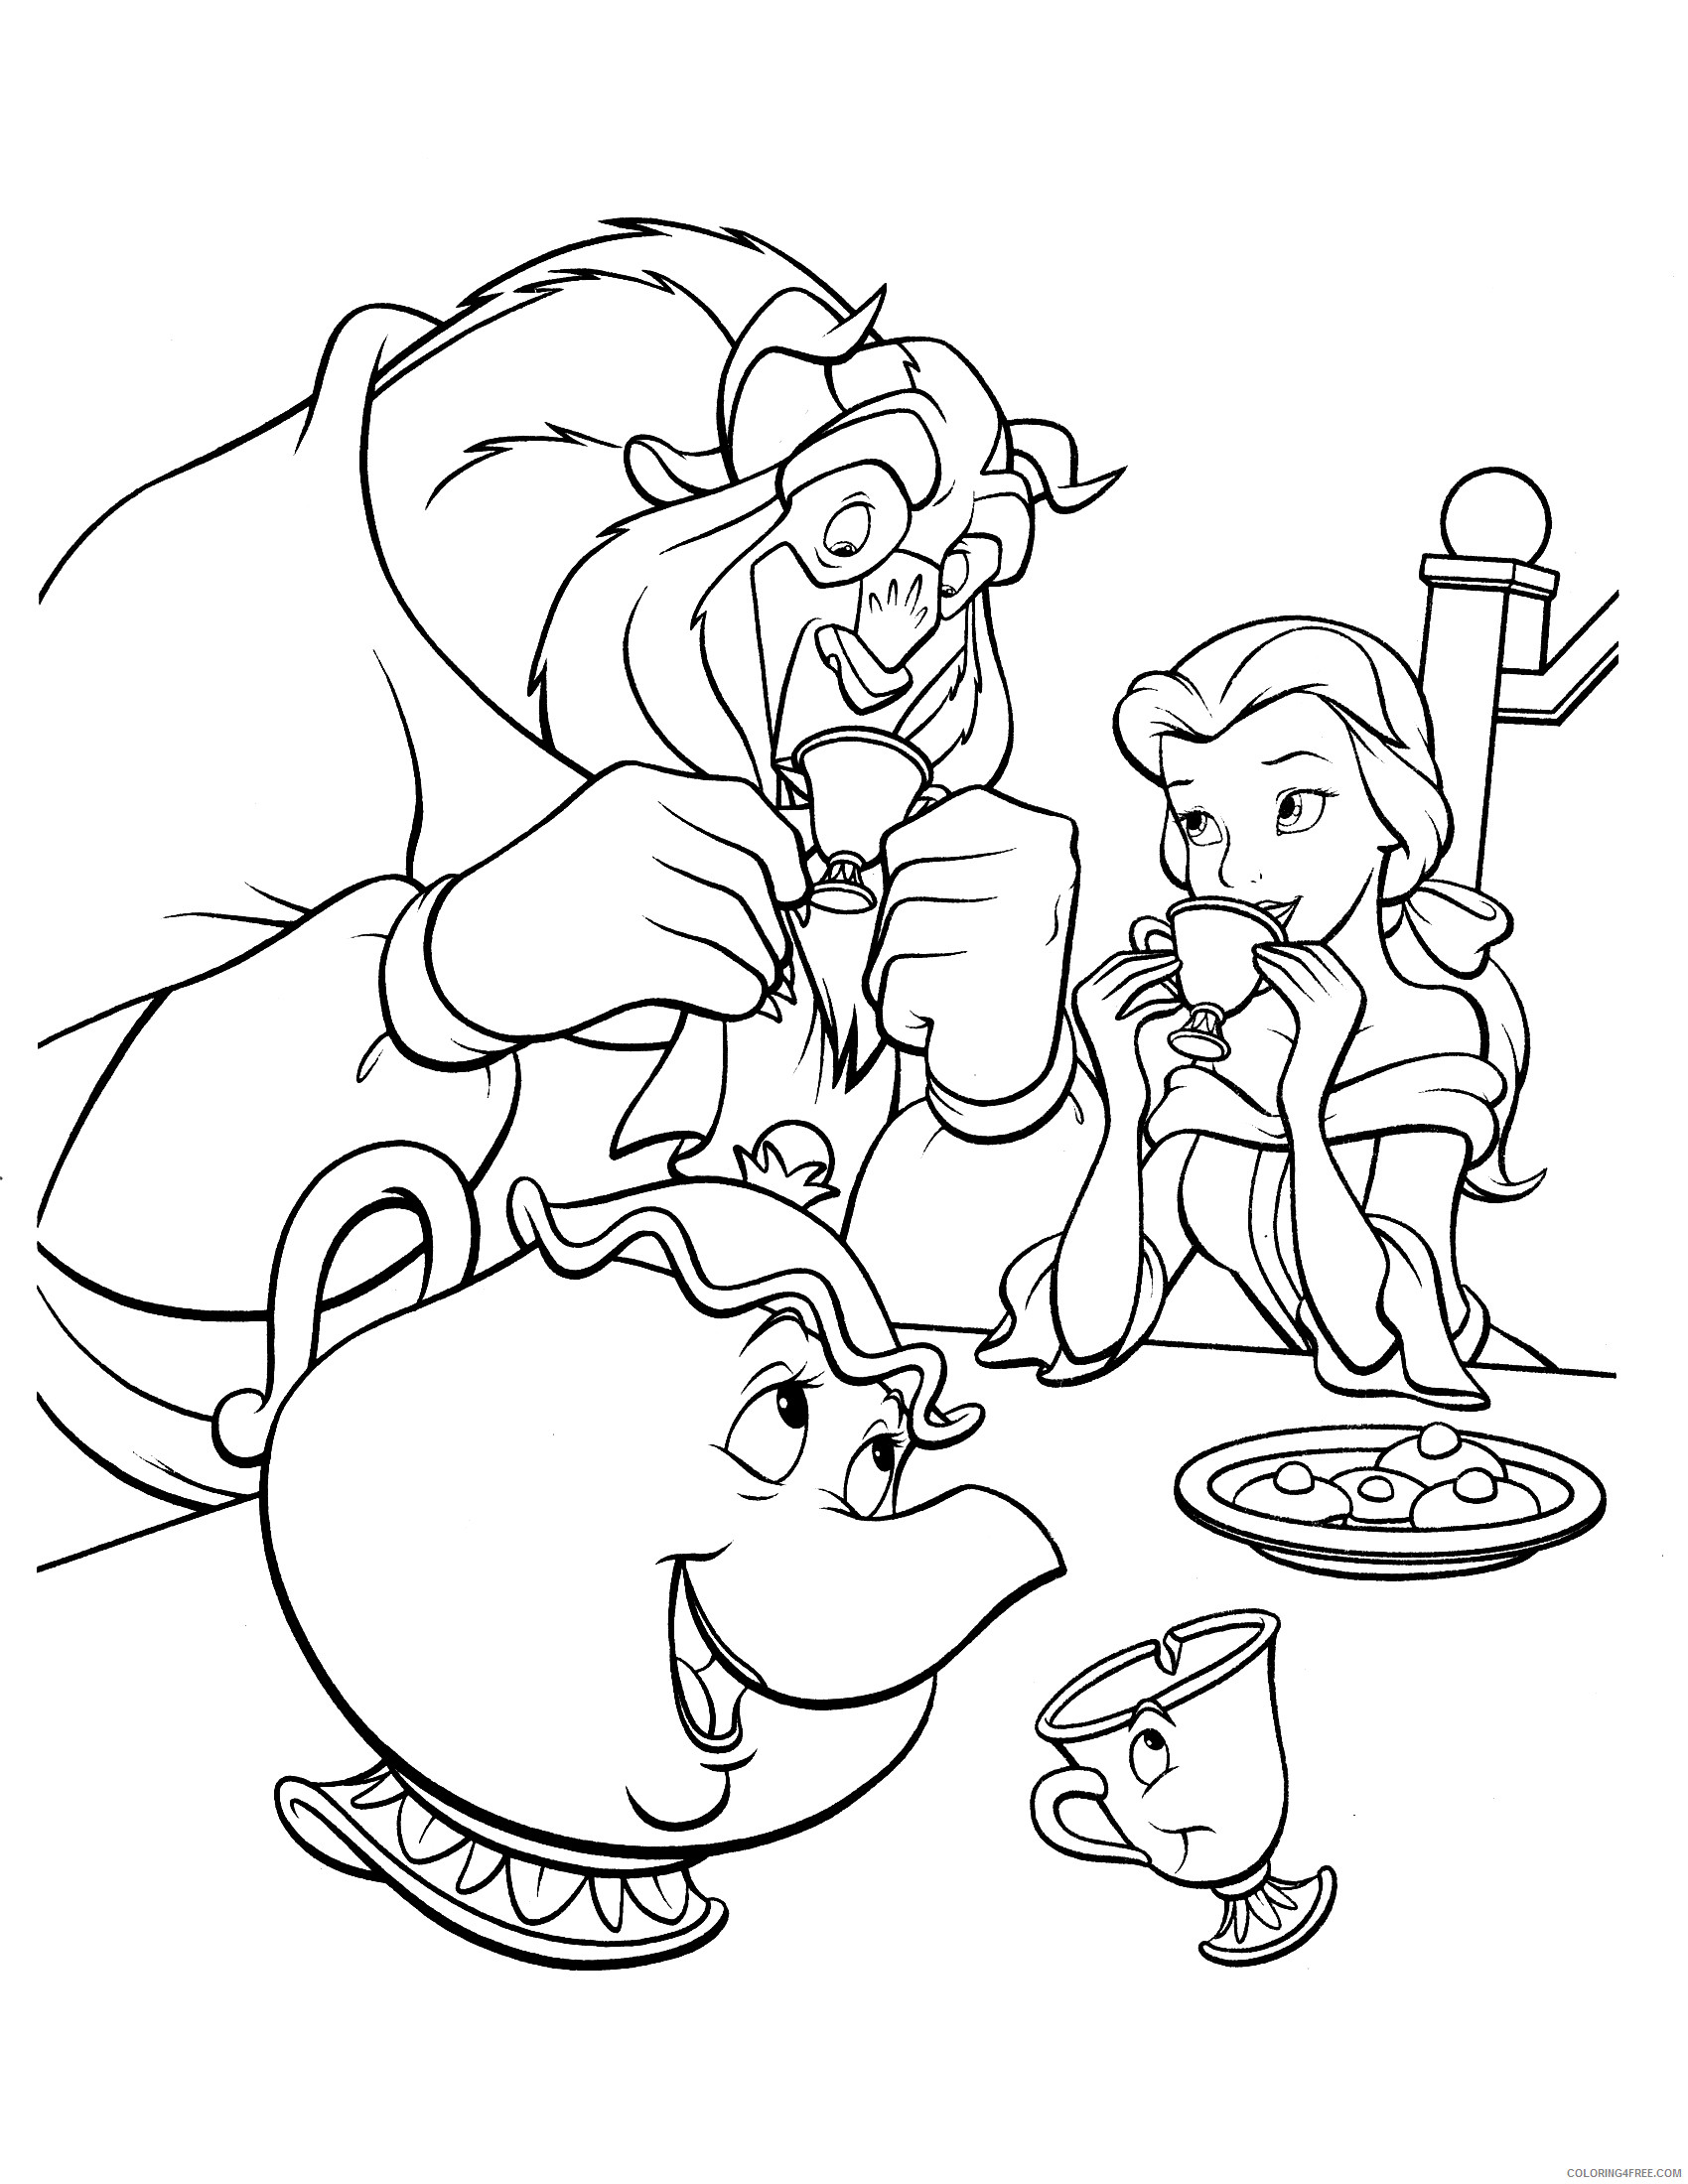 Beauty and the Beast Coloring Pages Cartoons Beauty and the Beast Printable 2020 1161 Coloring4free